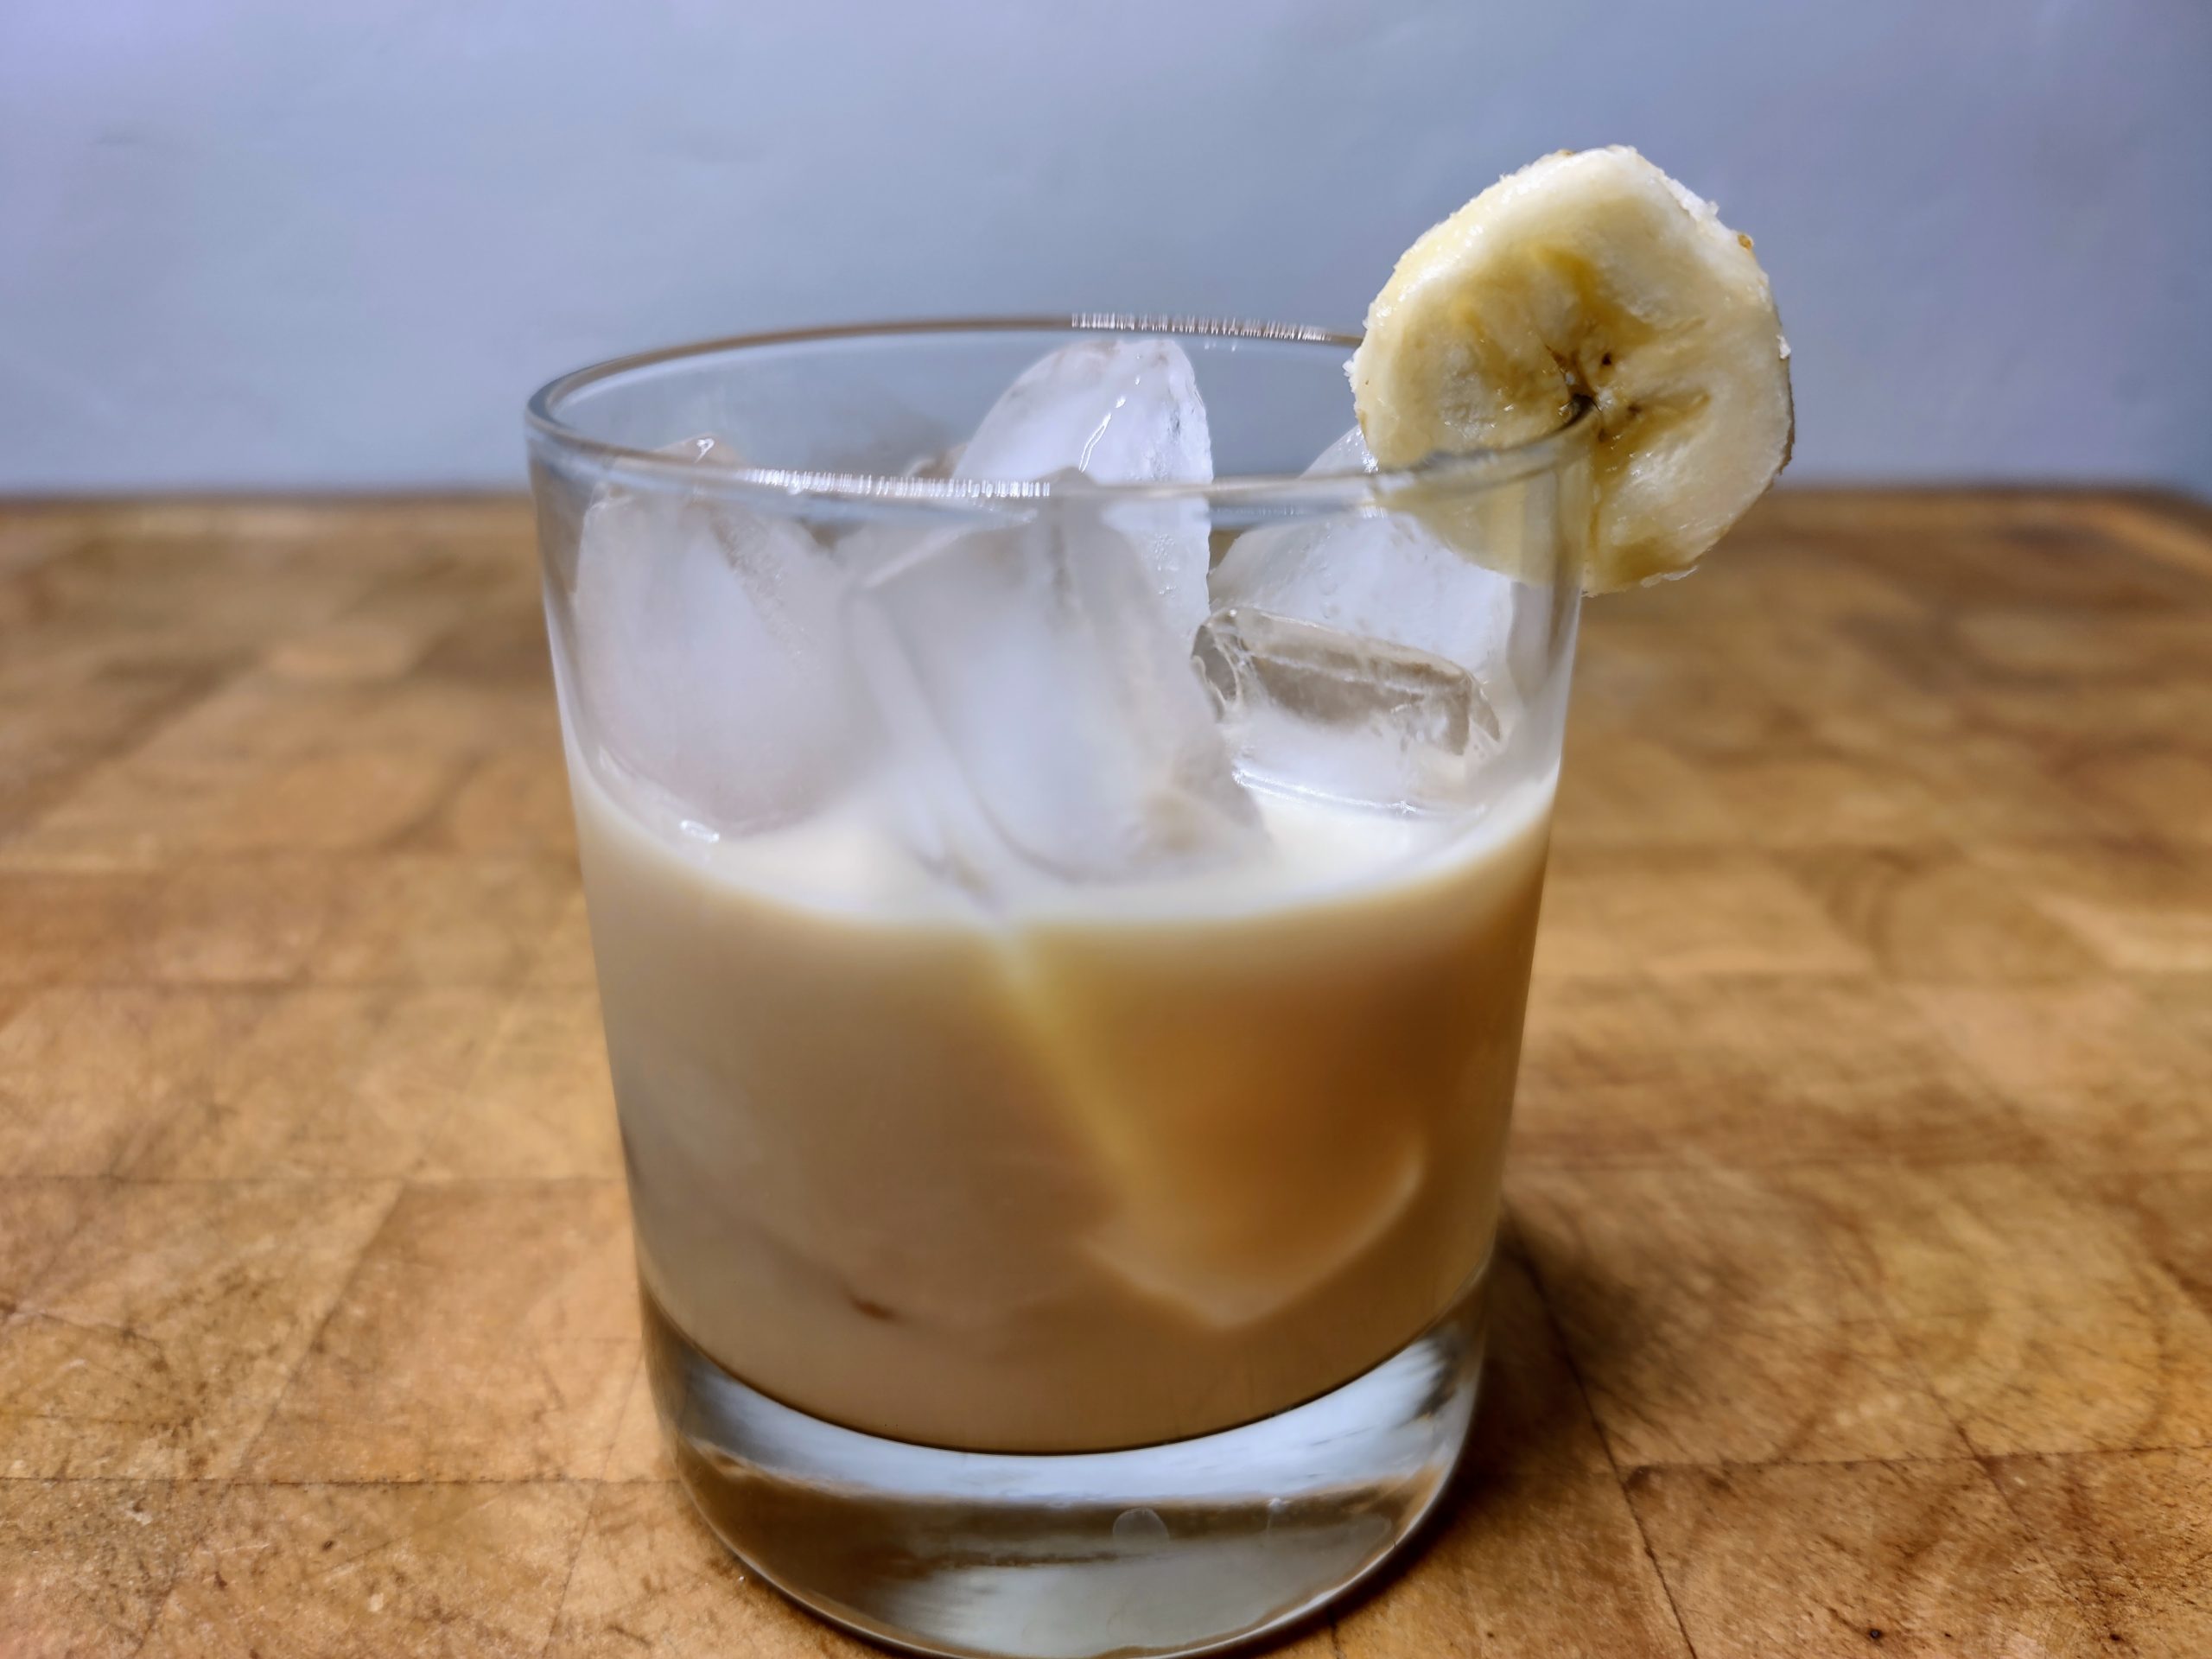 Banana foster cocktail in a rocks glass with a banana slice on the rim.